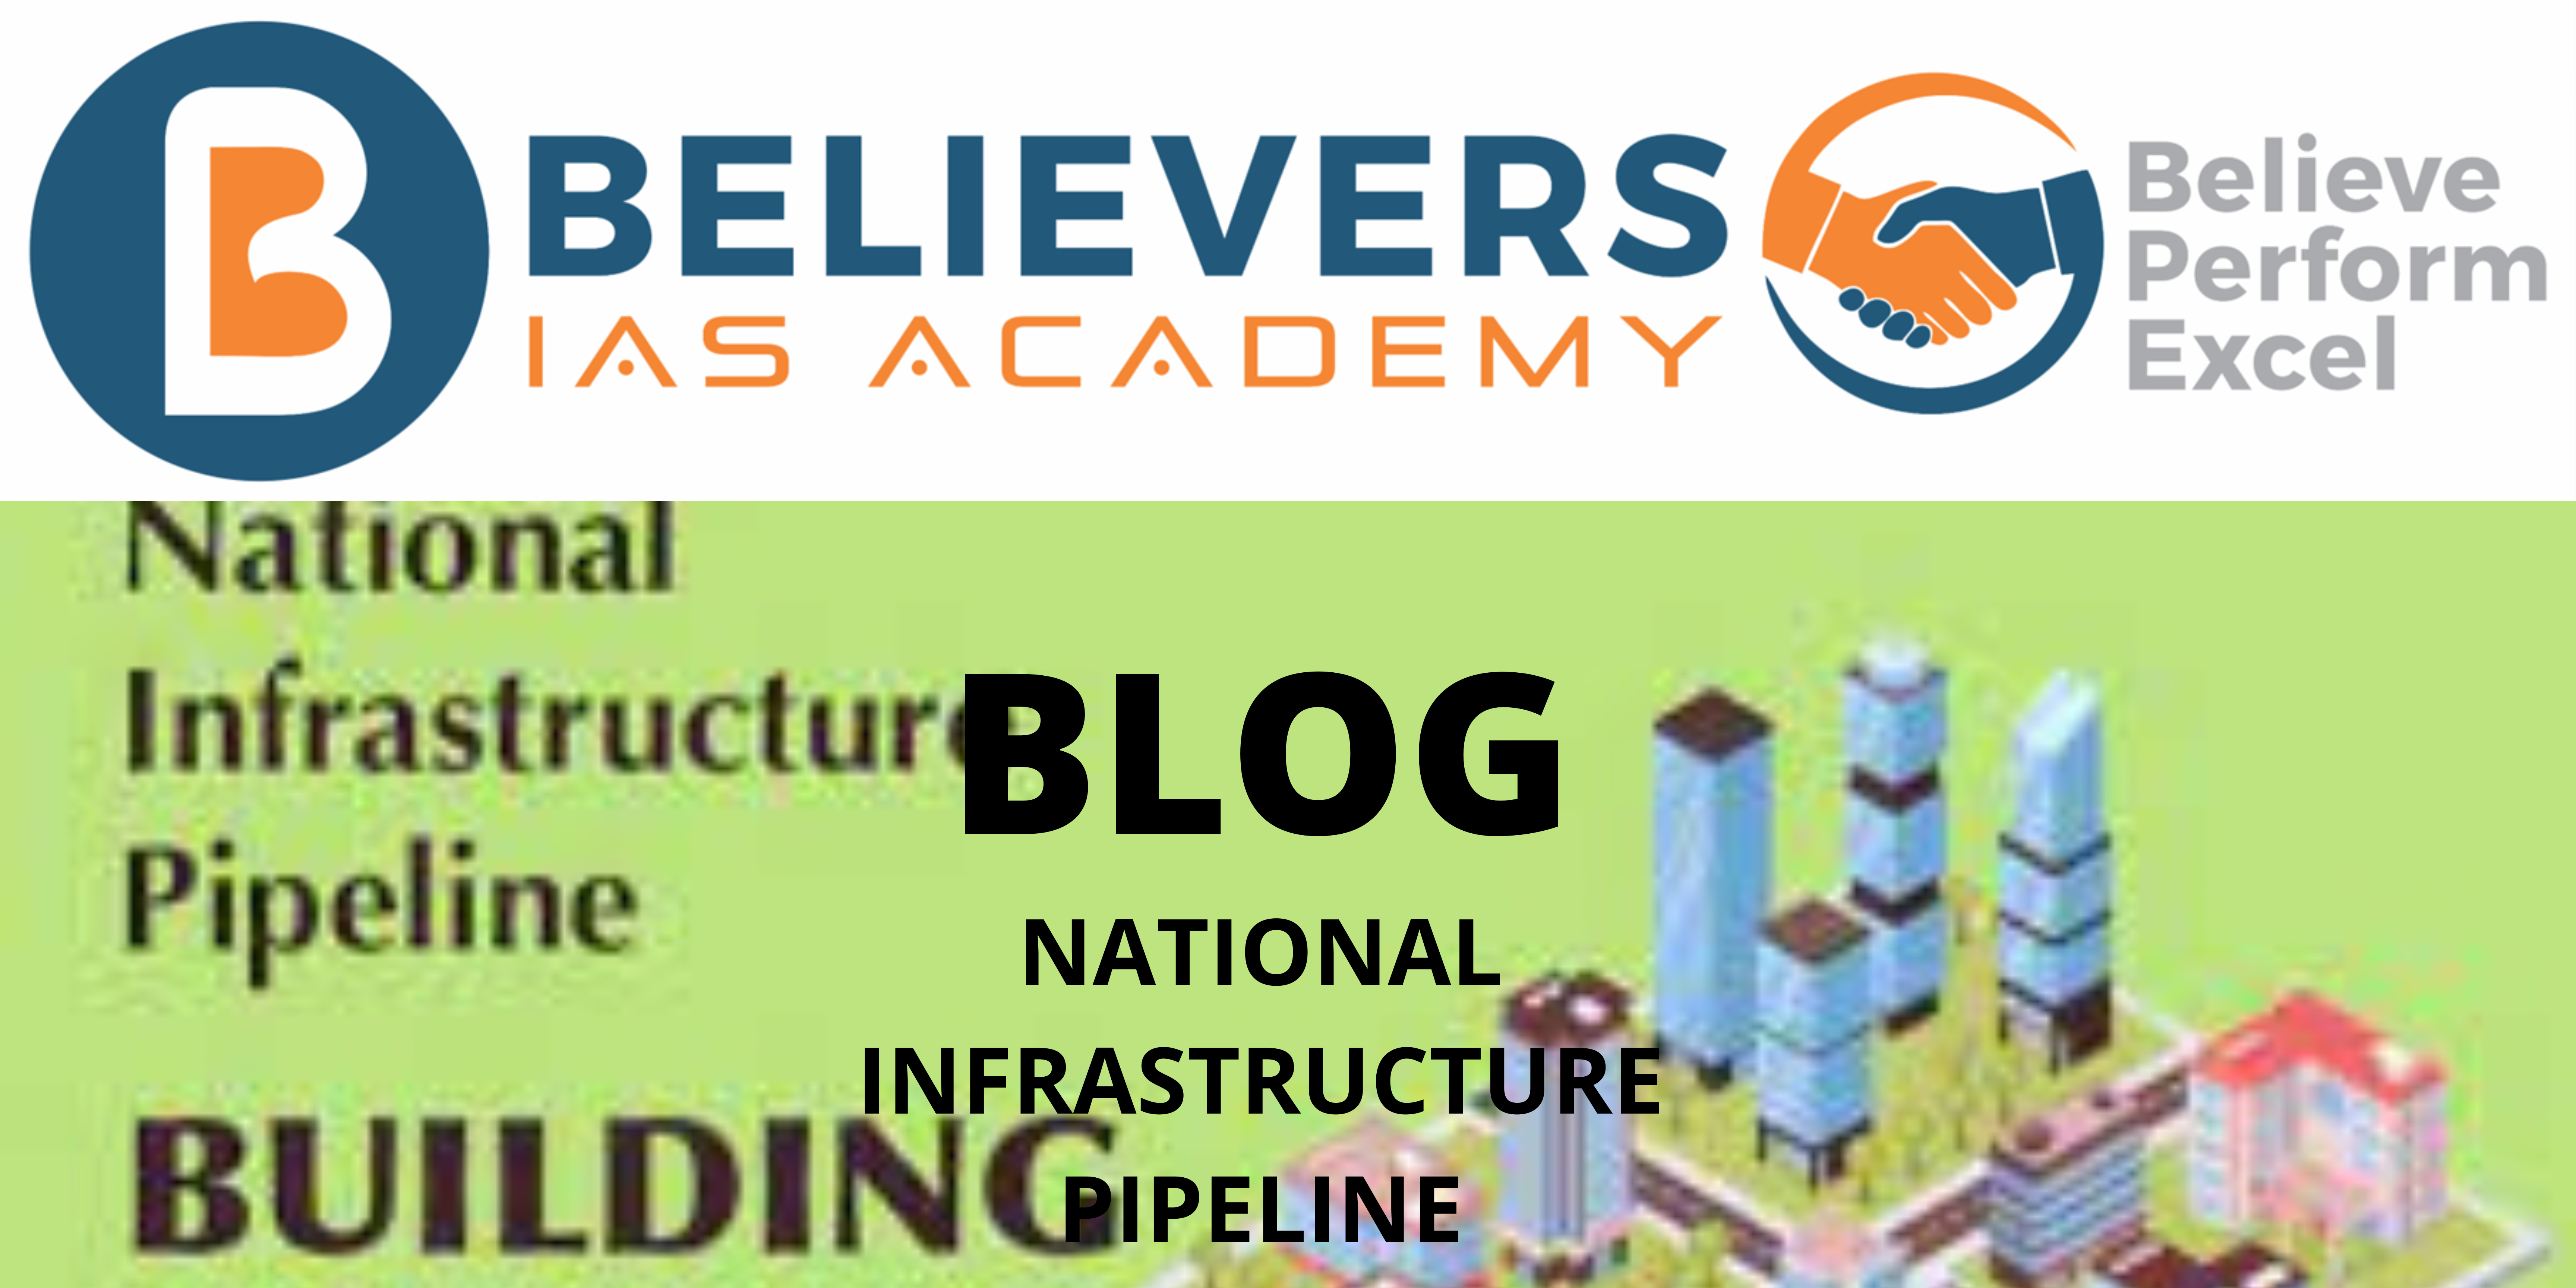 NATIONAL INFRASTRUCTURE PIPELINE